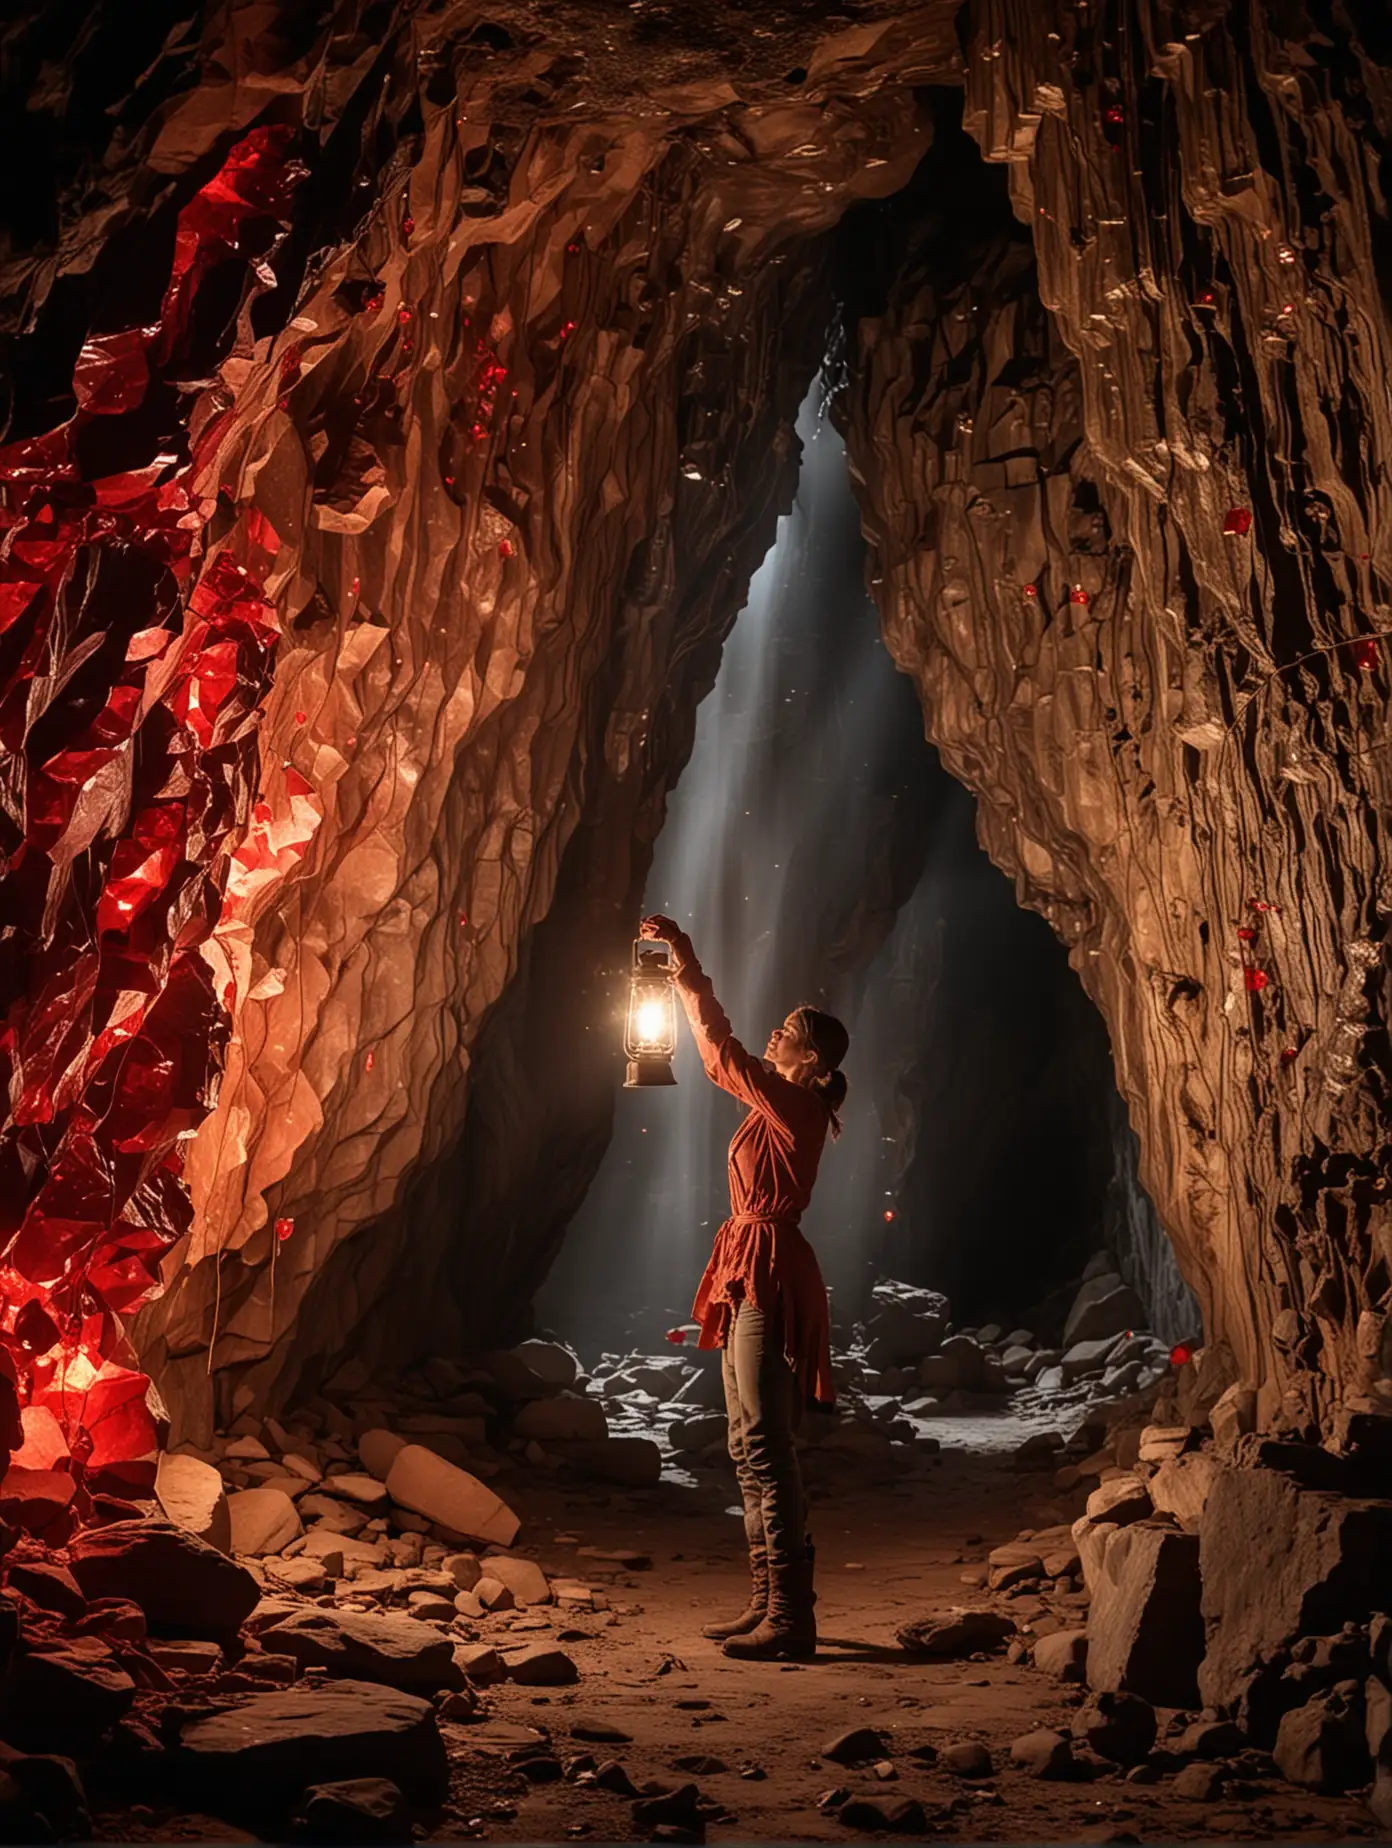 A woman, wearing weathered pants and boots, is facing away and holds up a lantern to a stone wall inside a vast cavern. The large wall has a vein of red glistening crystal running down it.